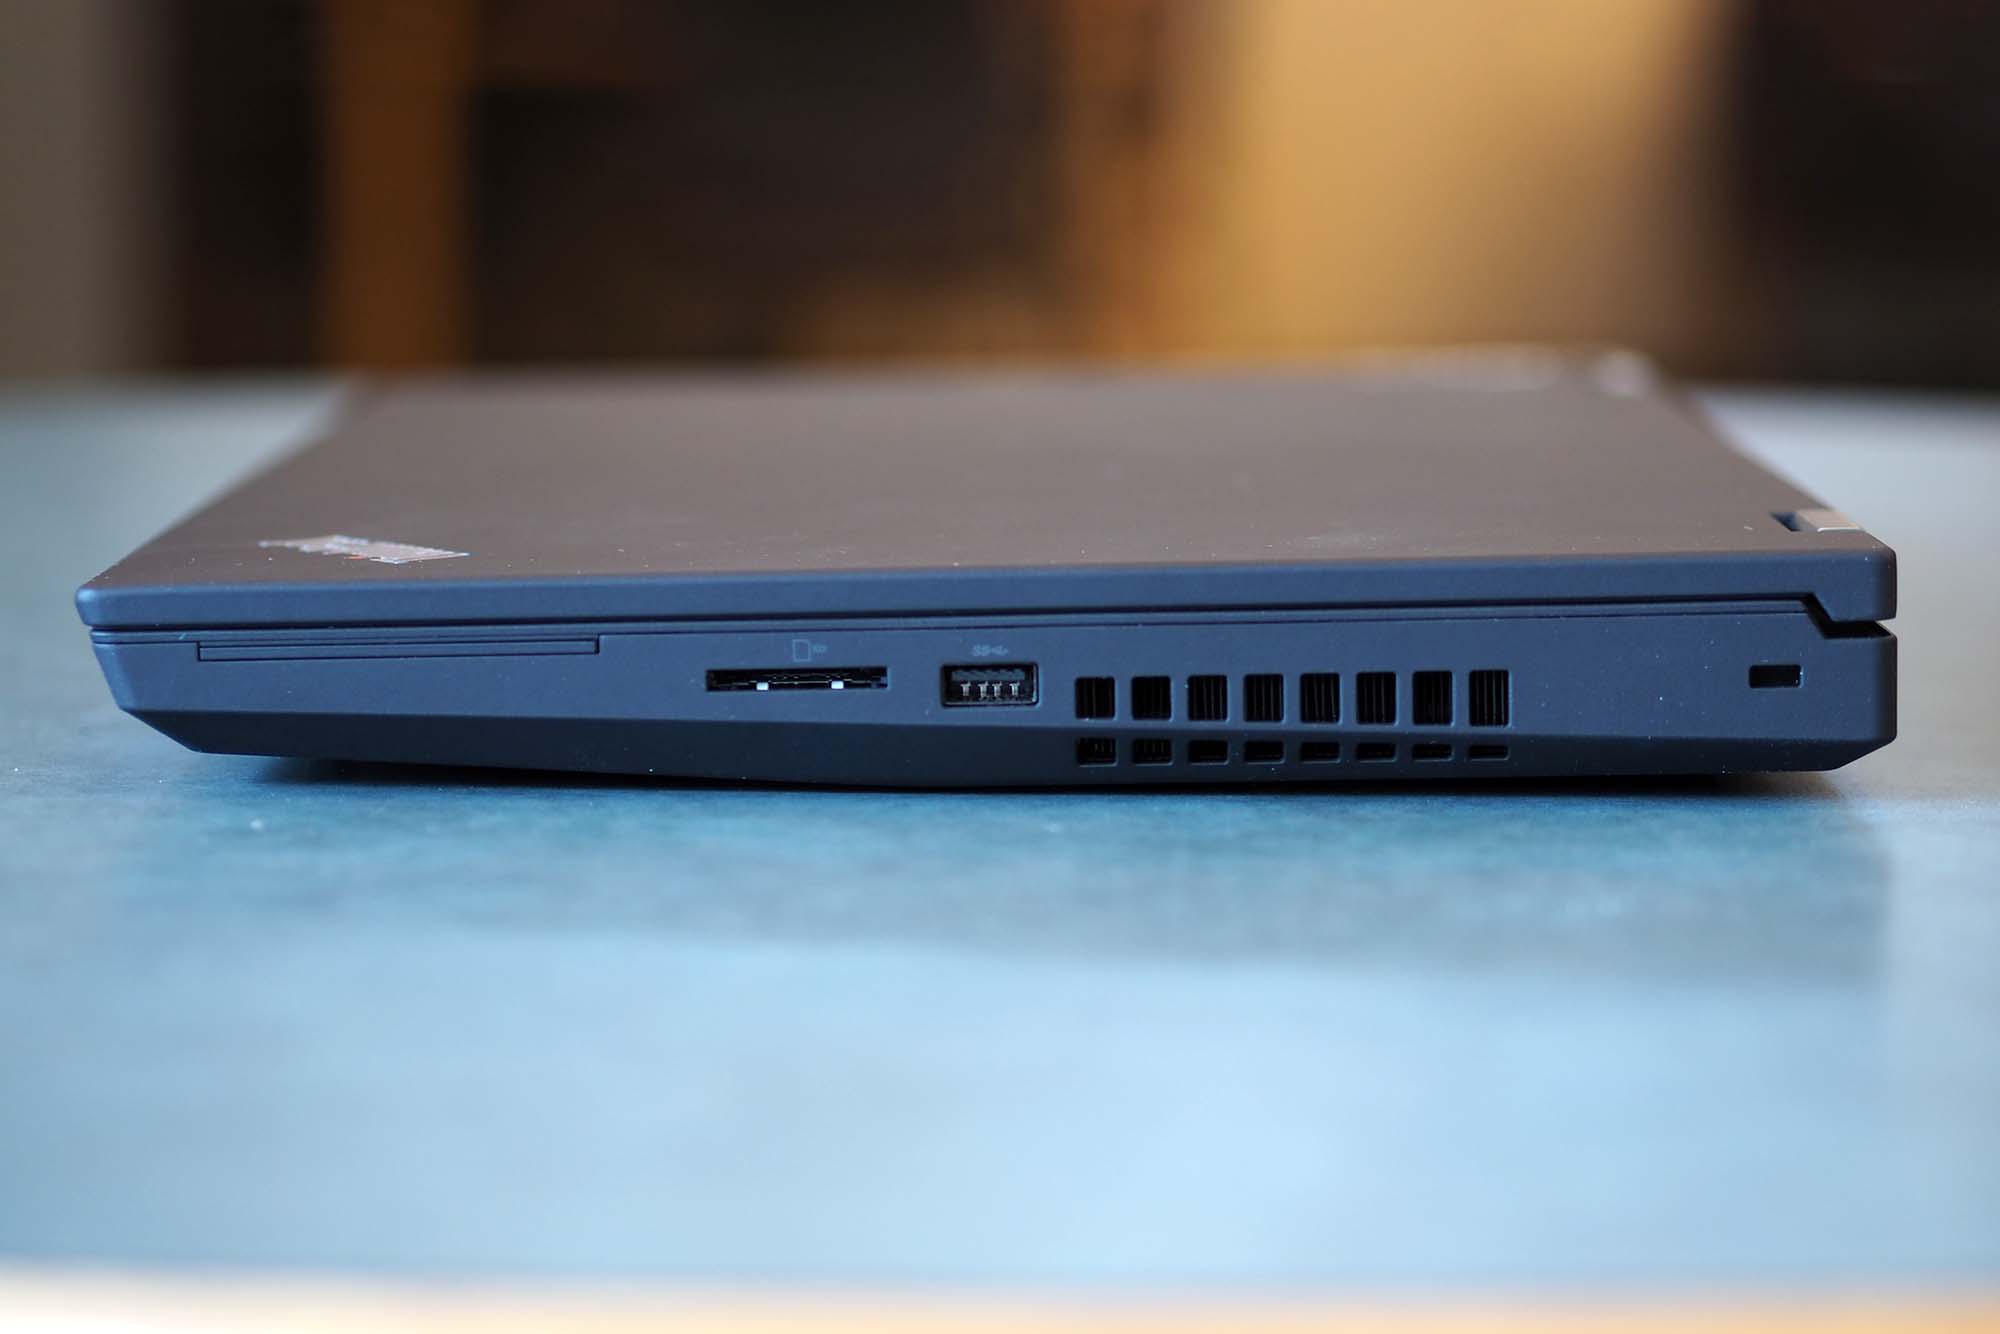 SD card reader and USB port on the right side of the Lenovo ThinkPad P15 Gen 2 laptop.